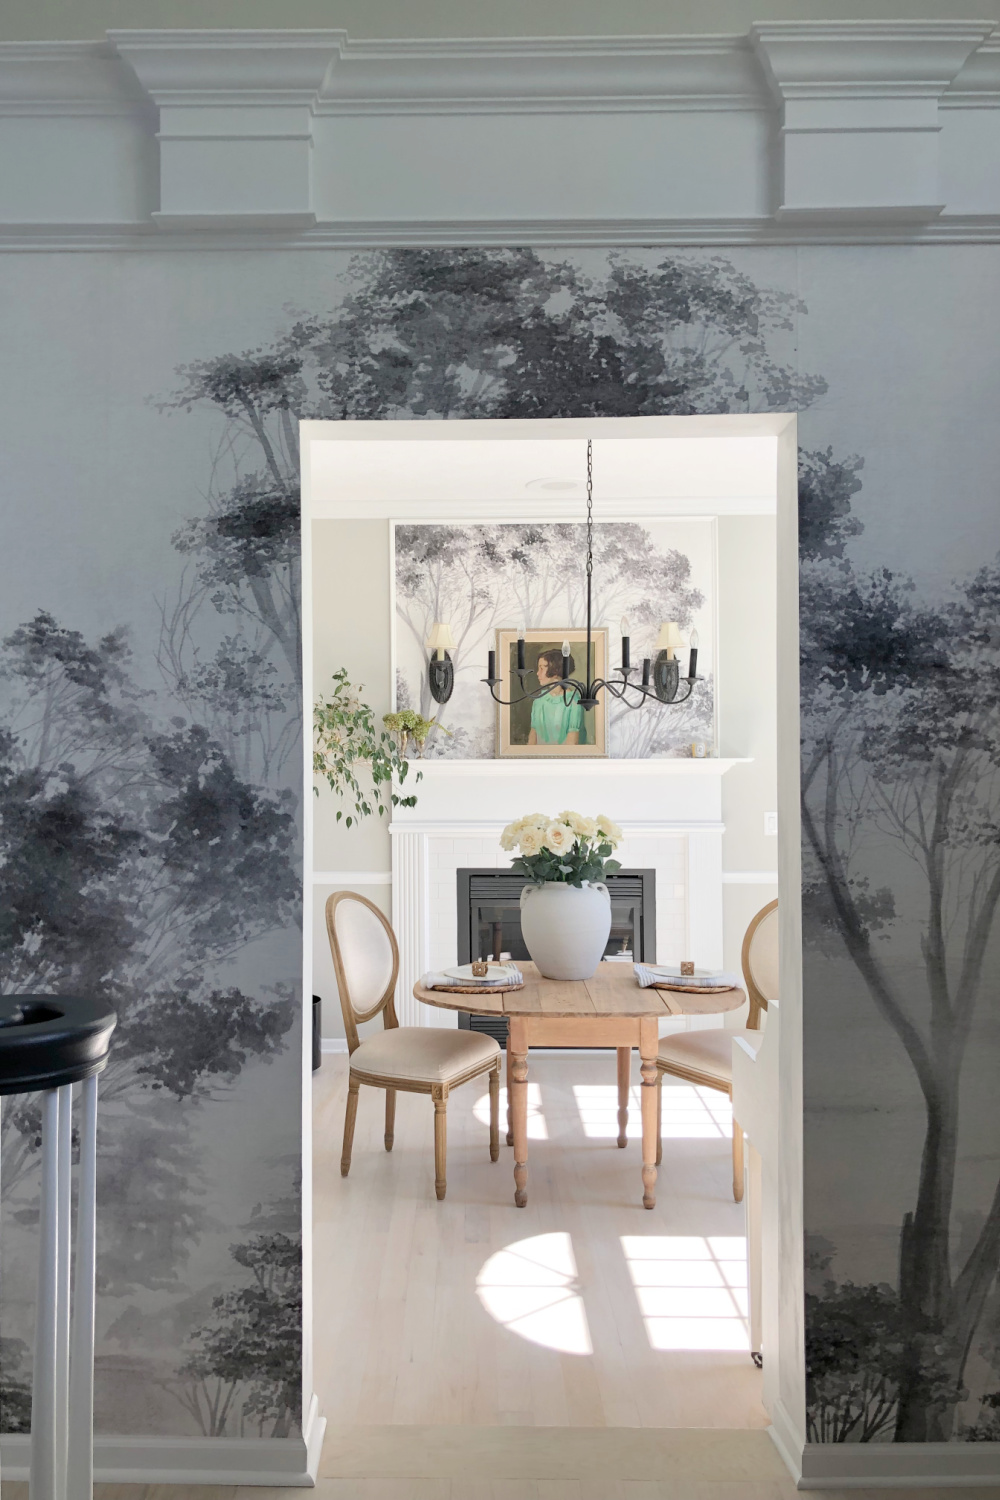 Hello Lovely's entry and dining room with tree mural wallpaper and light oak floors. #diningrooms #treemural